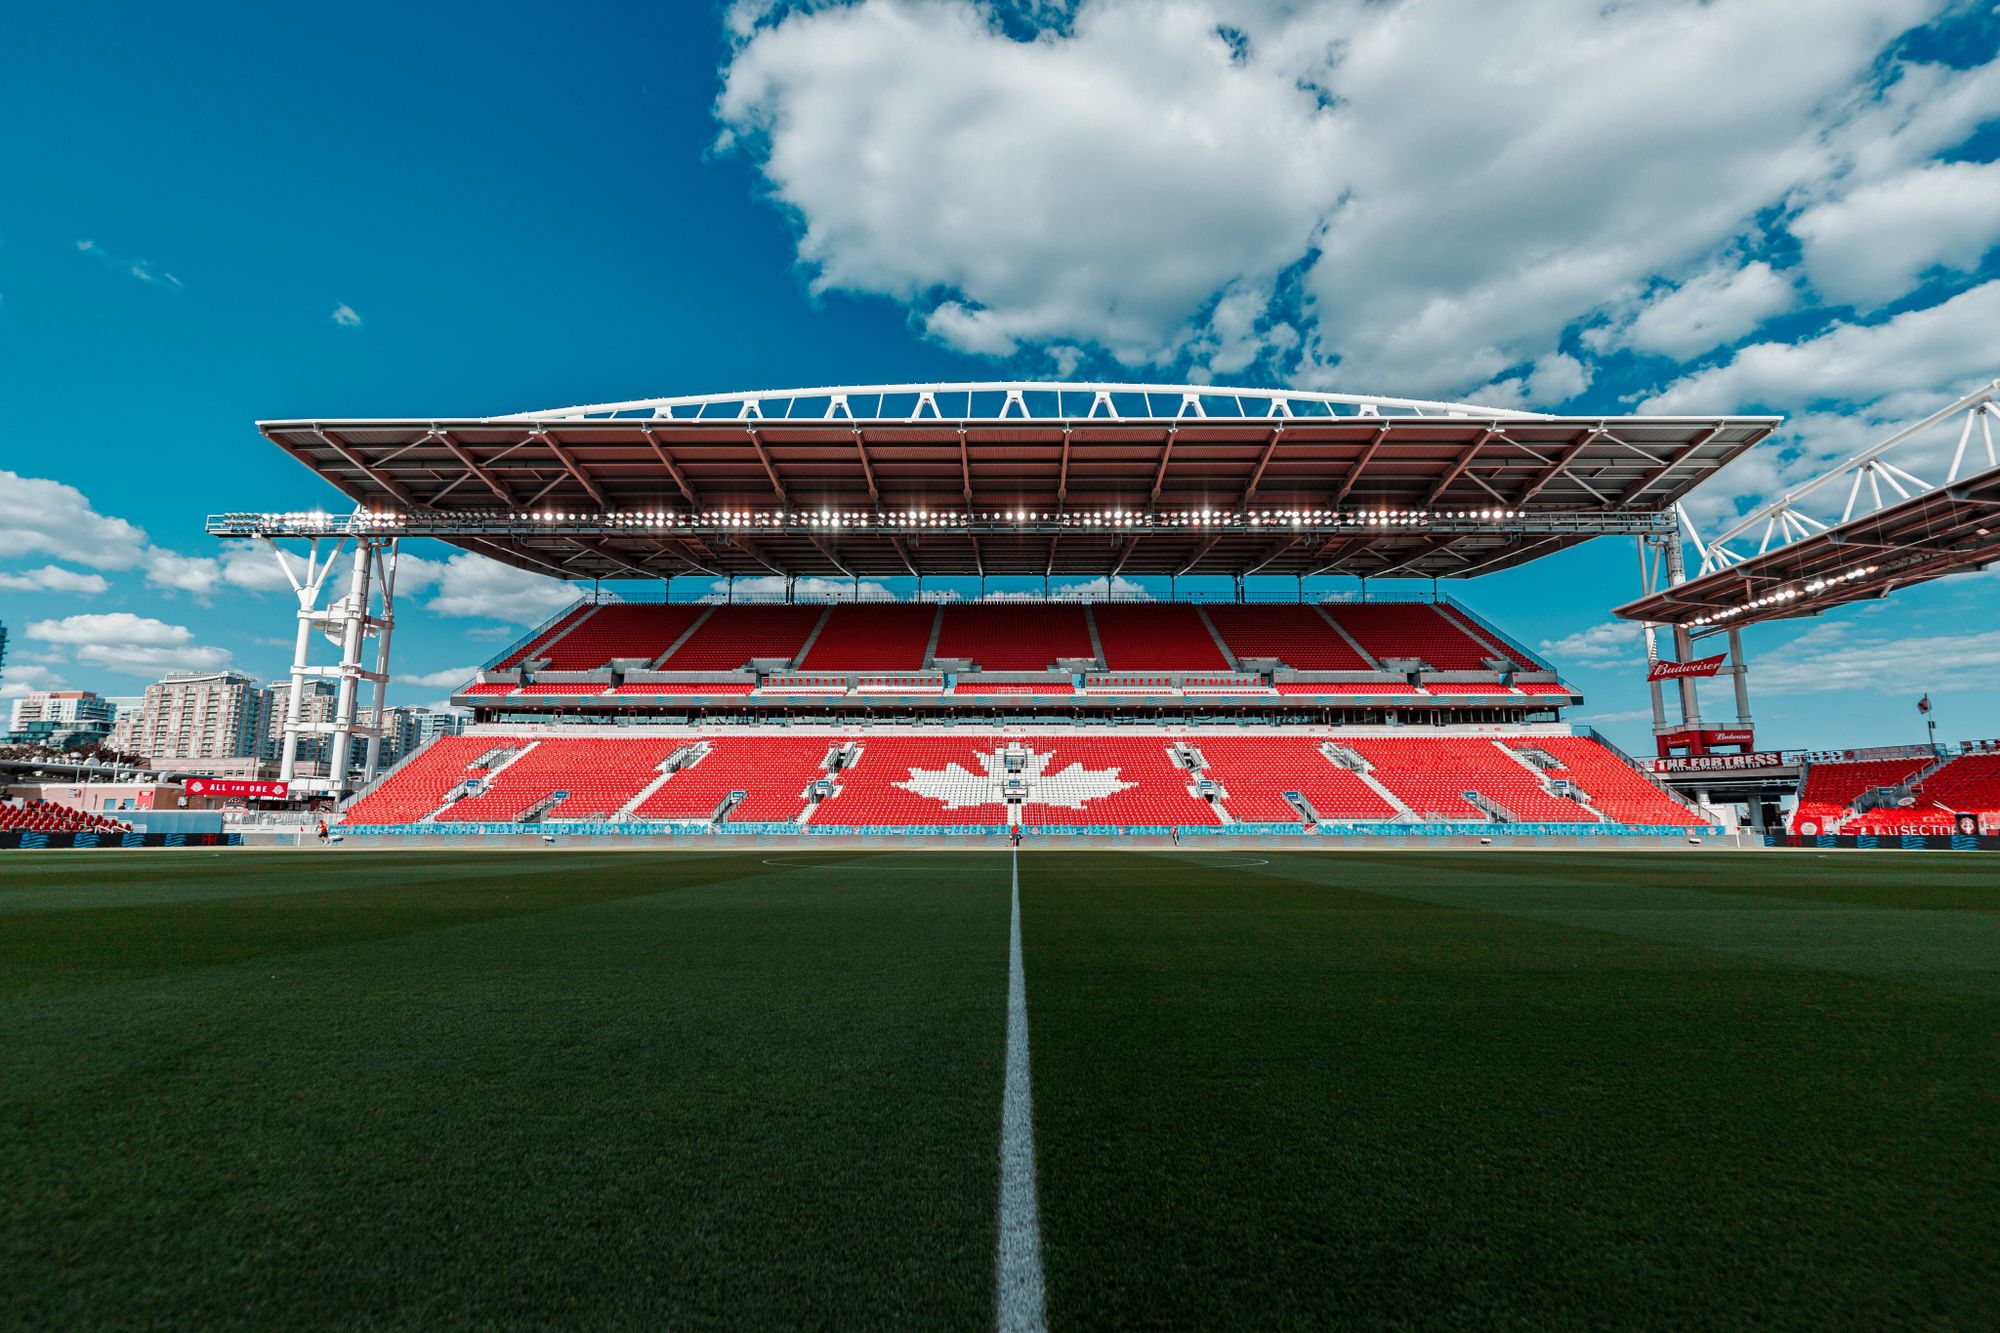 TFC Republic Mailbag: What's going on with the pitch at BMO?